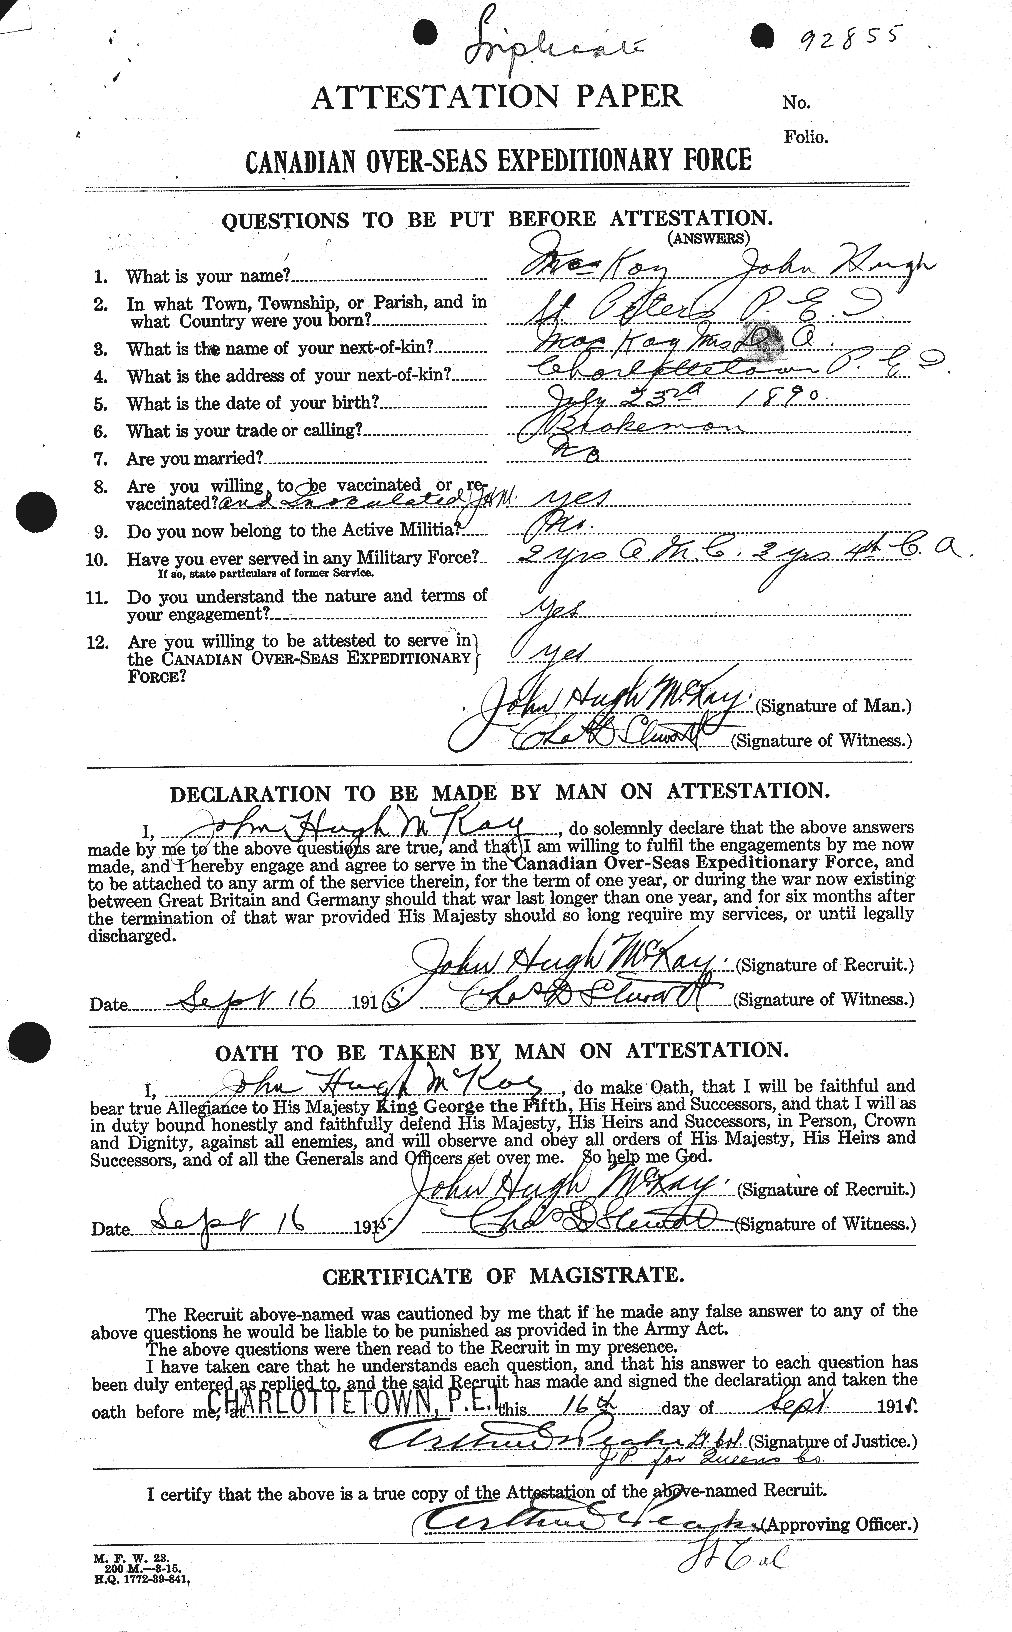 Personnel Records of the First World War - CEF 527070a